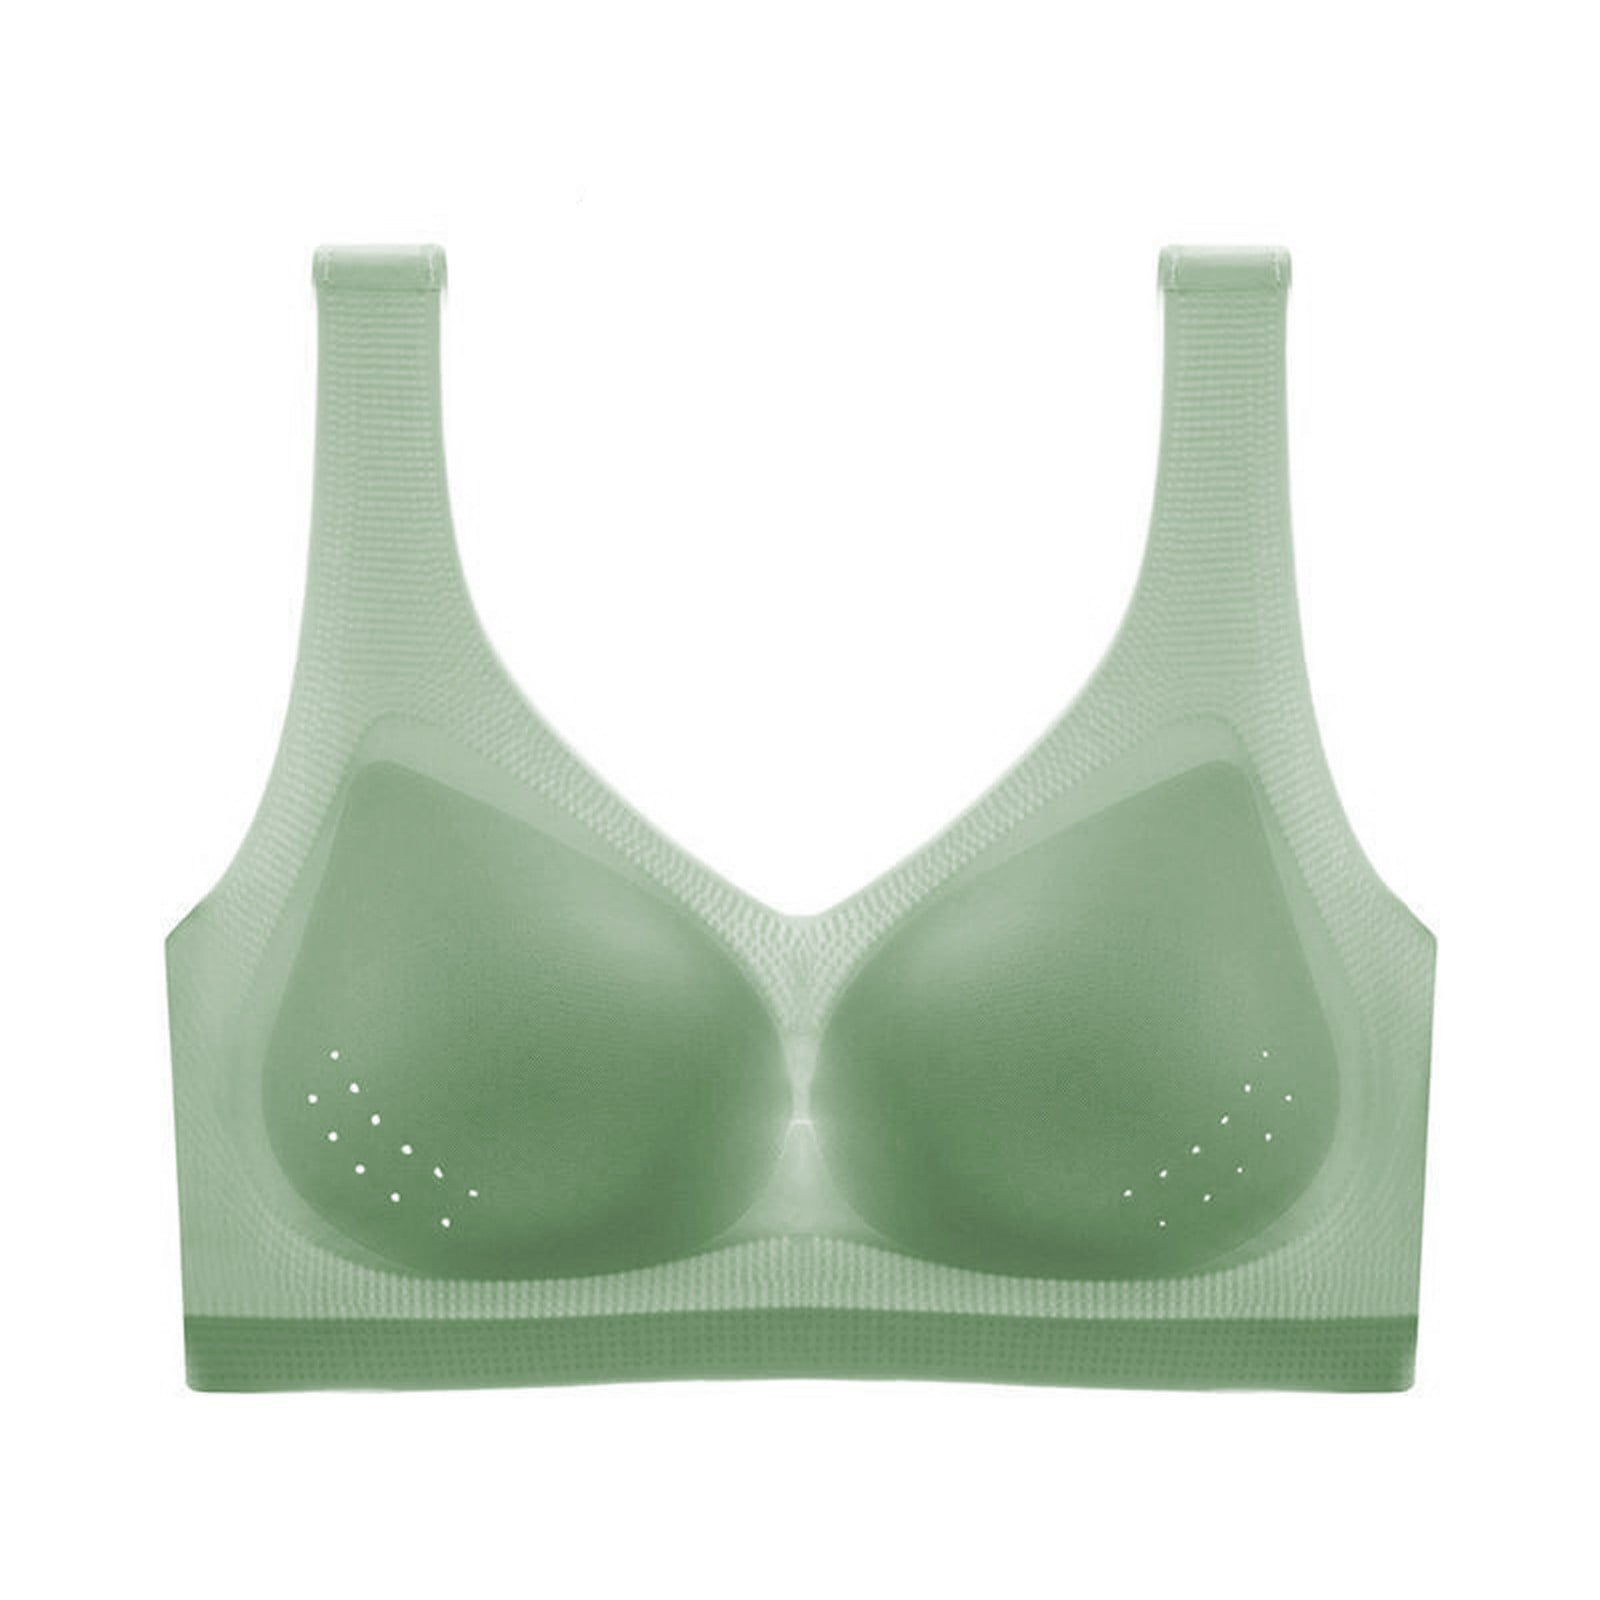 Buy Green Calibra Bra for Women Size 32 80 Cms at